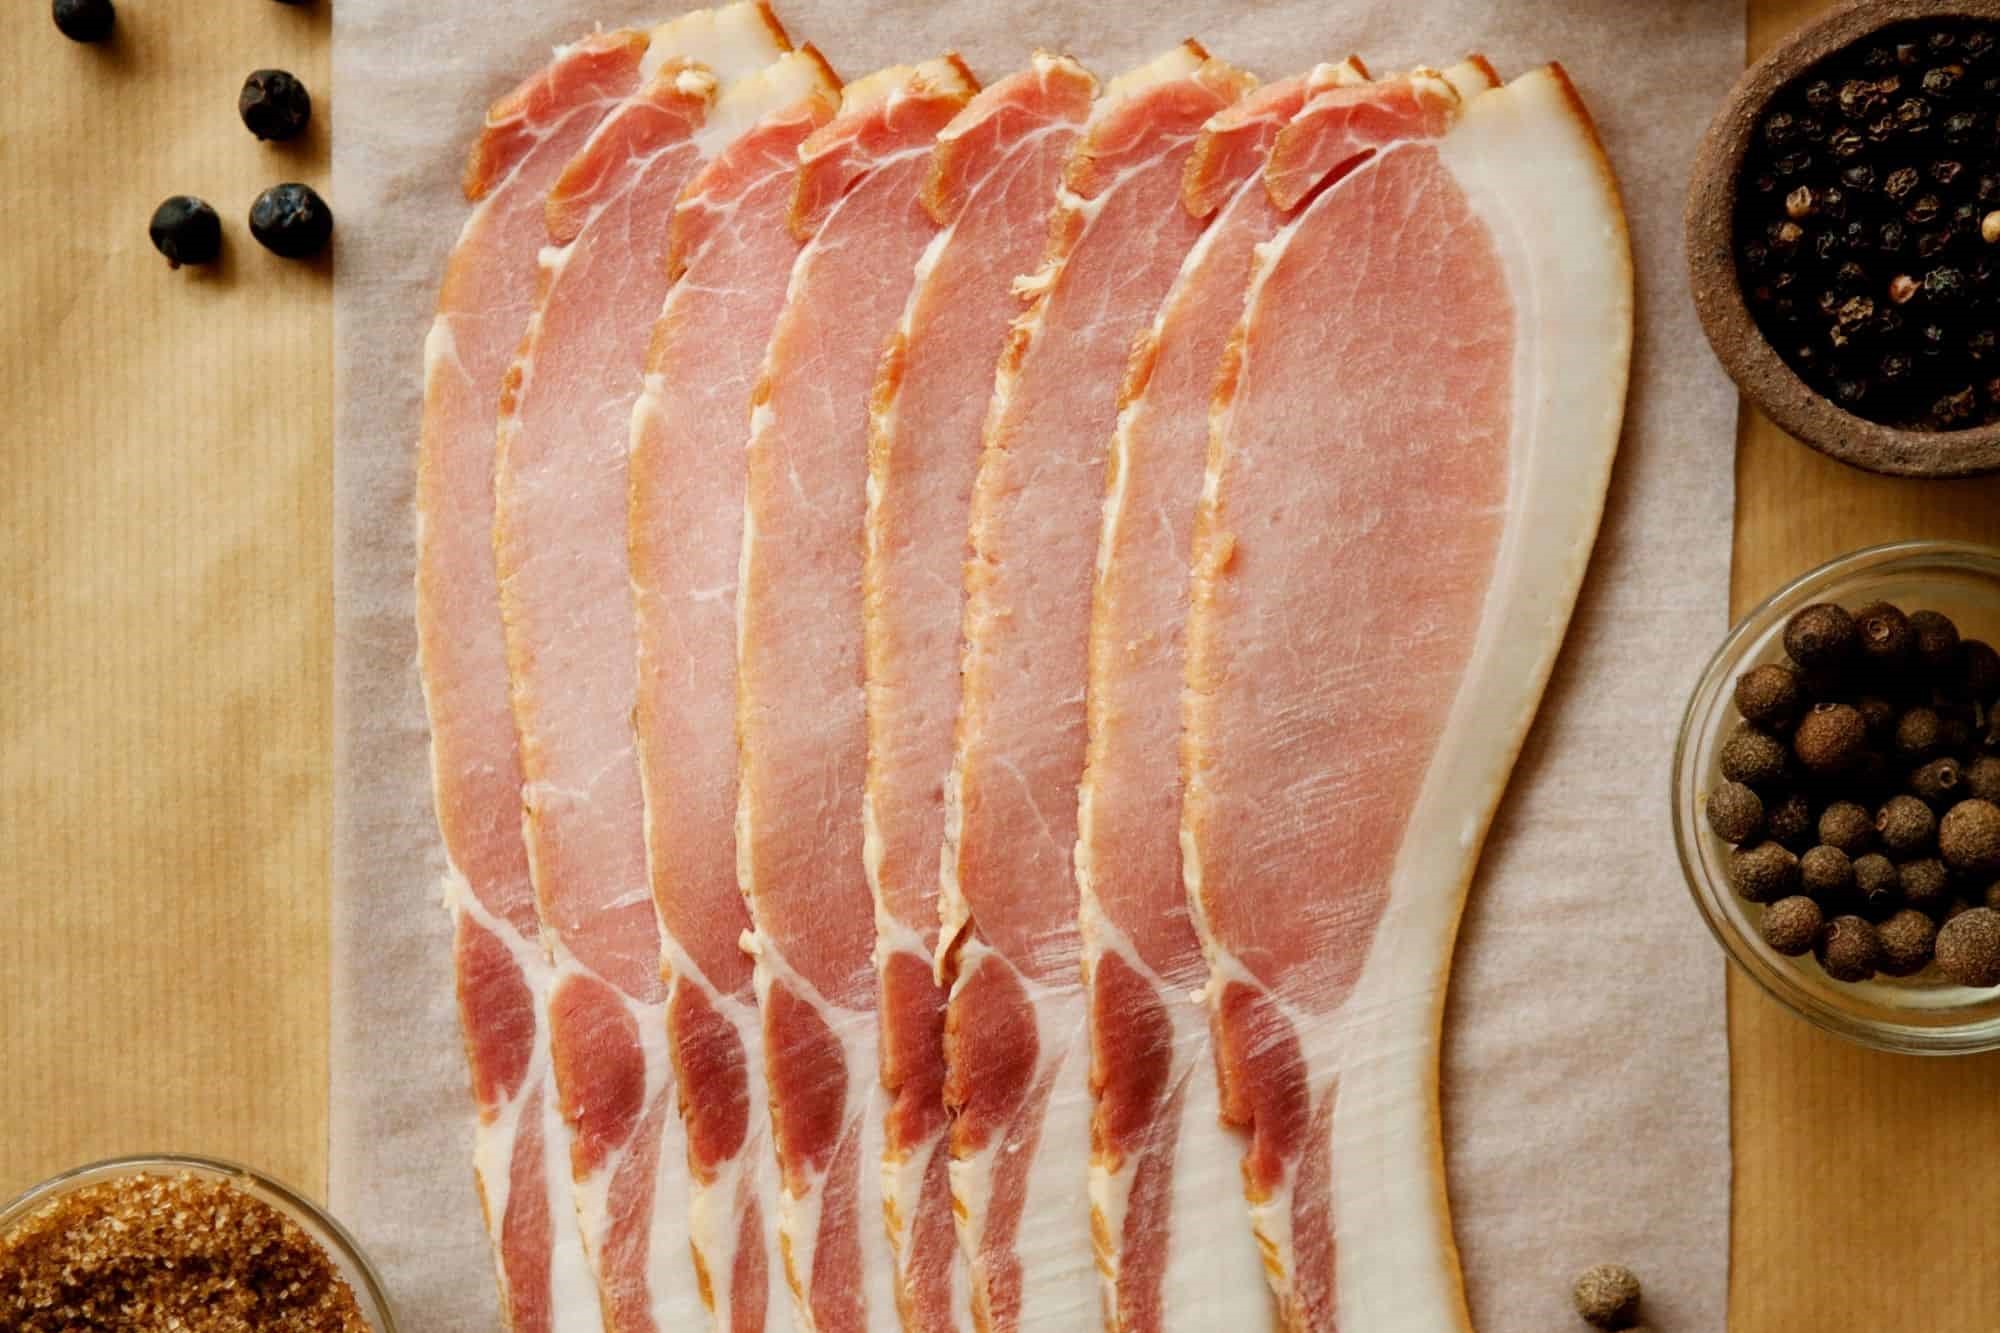 19-back-bacon-nutrition-facts